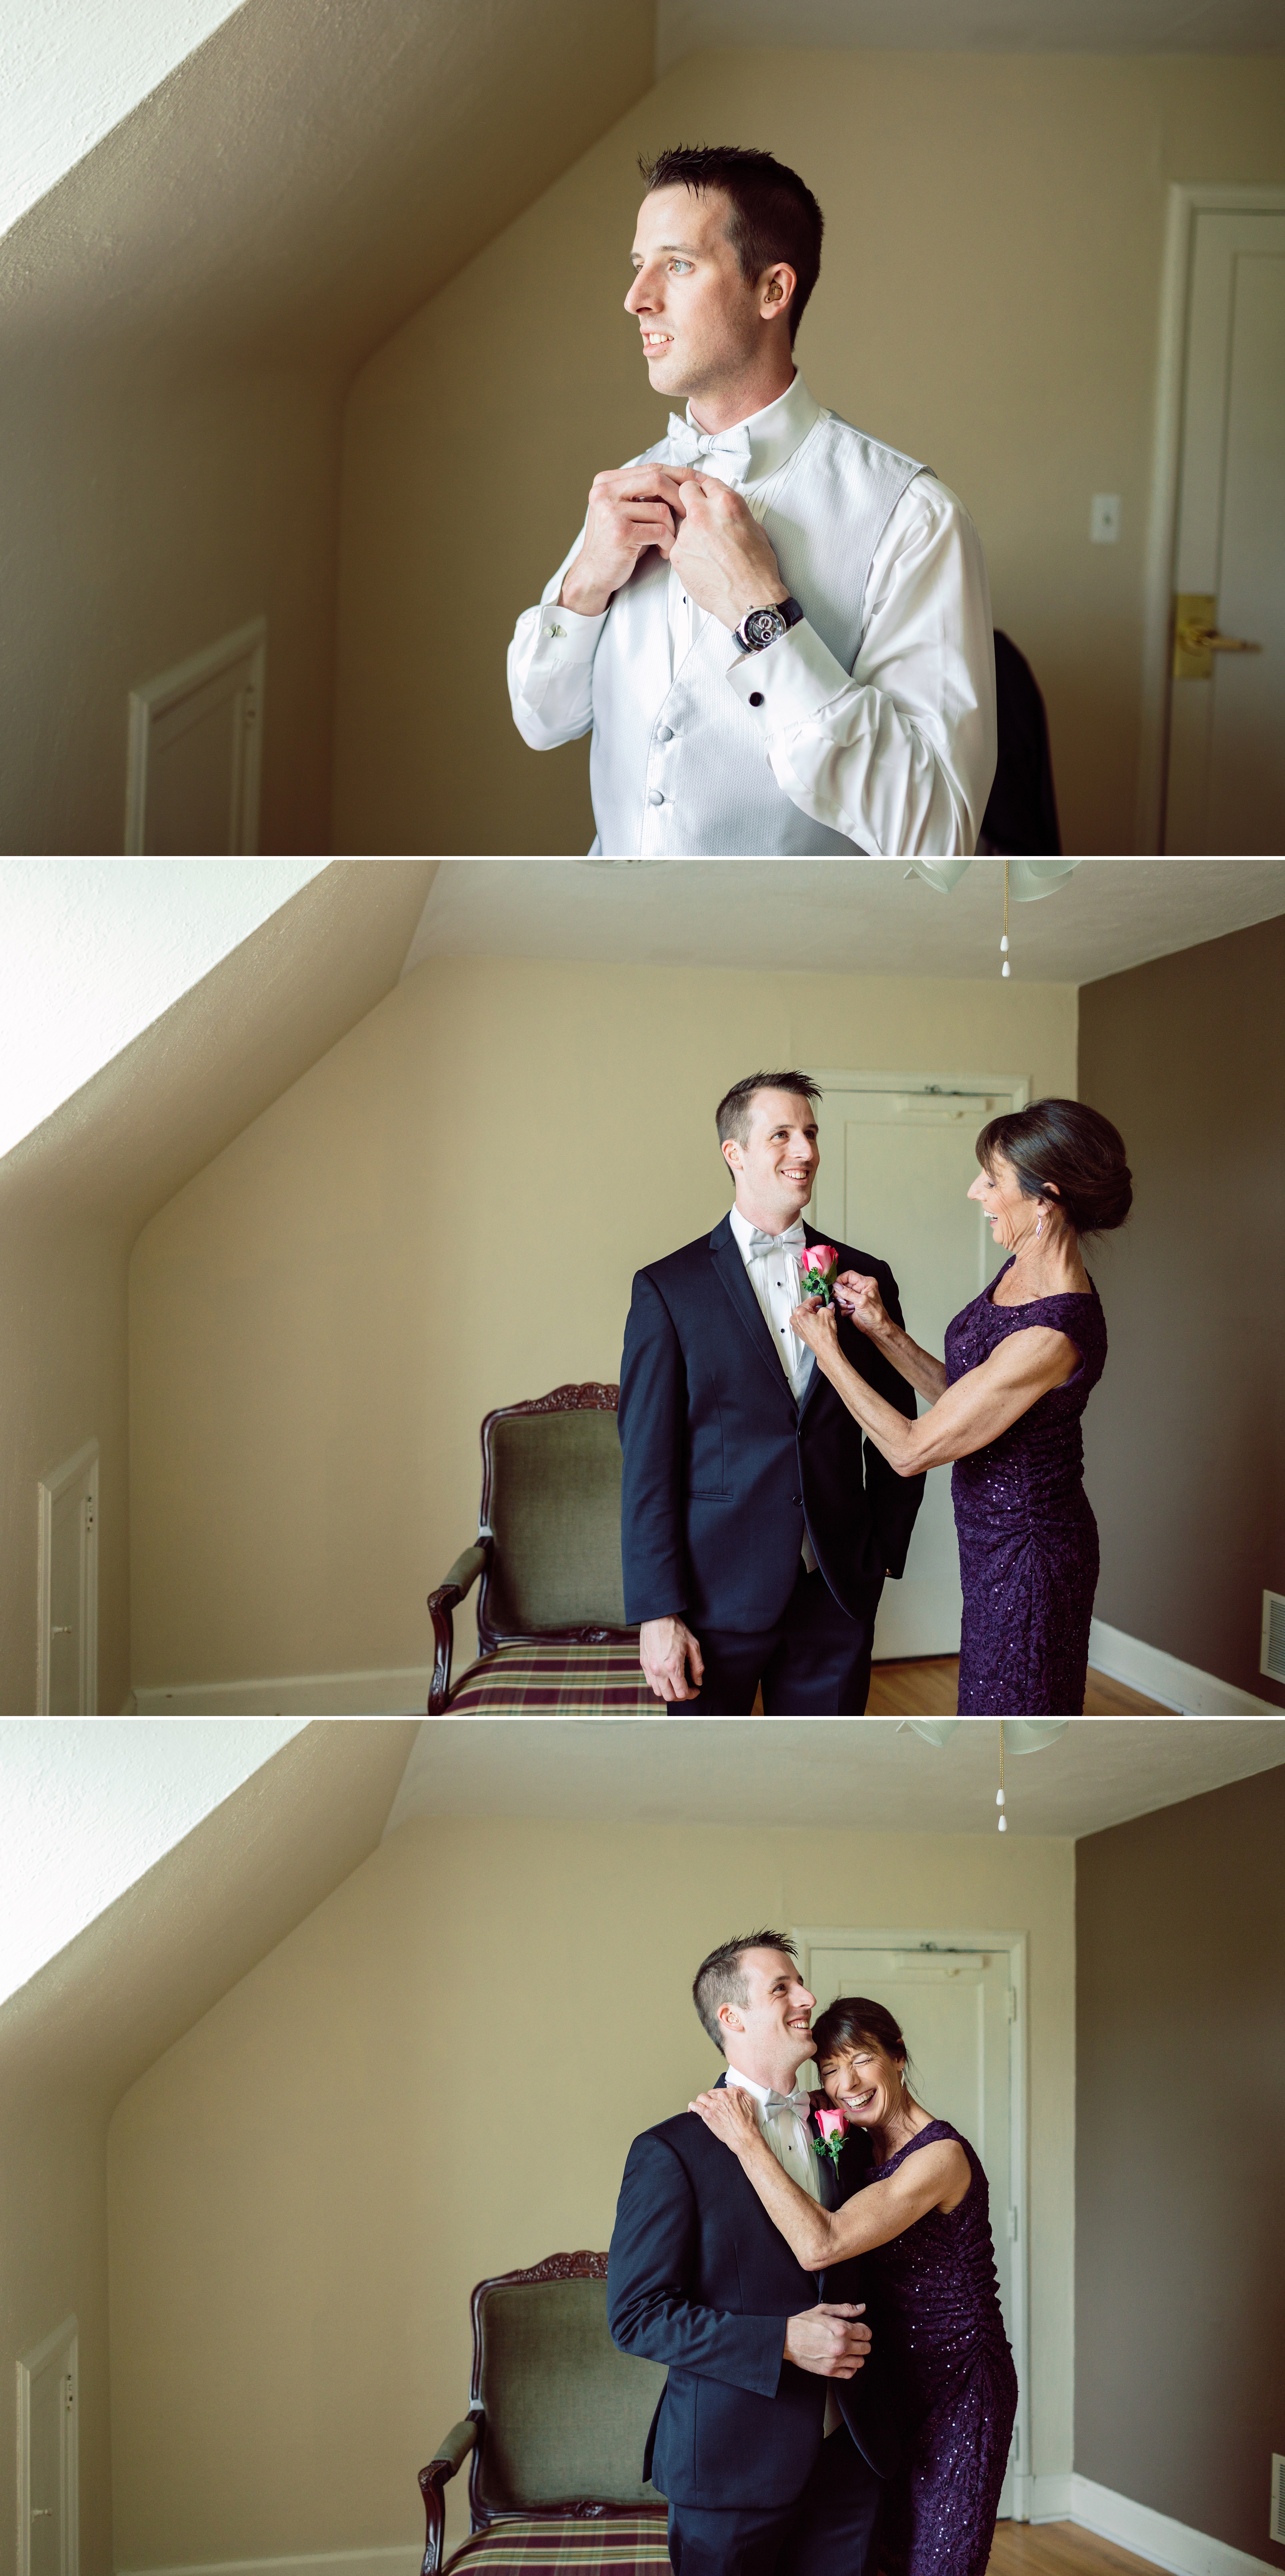 Groom getting ready photos at a Glen Oaks Country Club Wedding in Livonia Michigan